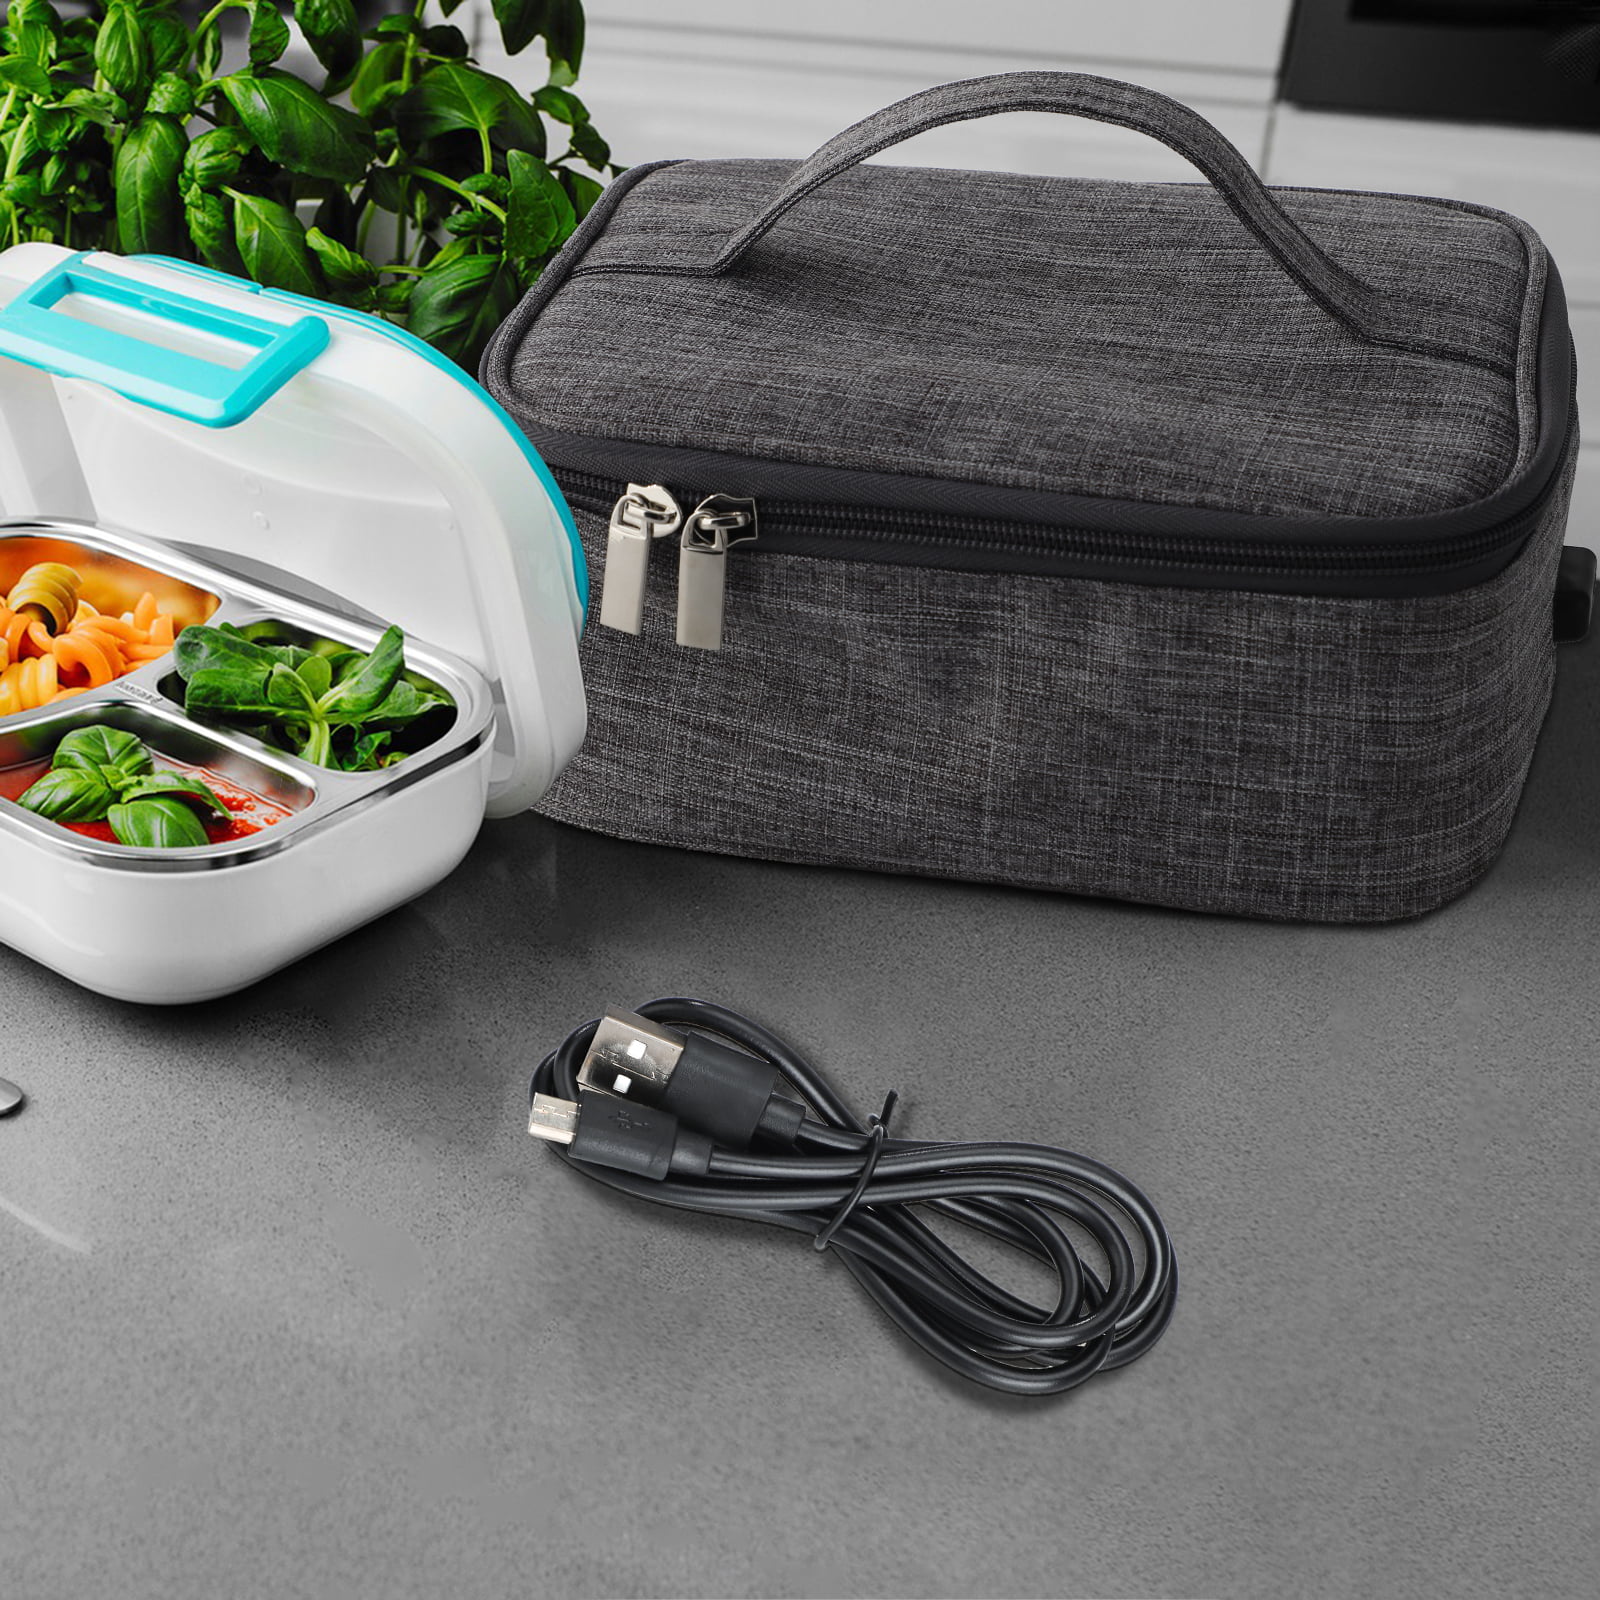 [90W Faster] Portable Oven, 110V 90W Portable Food Warmer Personal Portable  Oven Mini Electric Heated Lunch Box for Reheating & Raw Food Cooking in